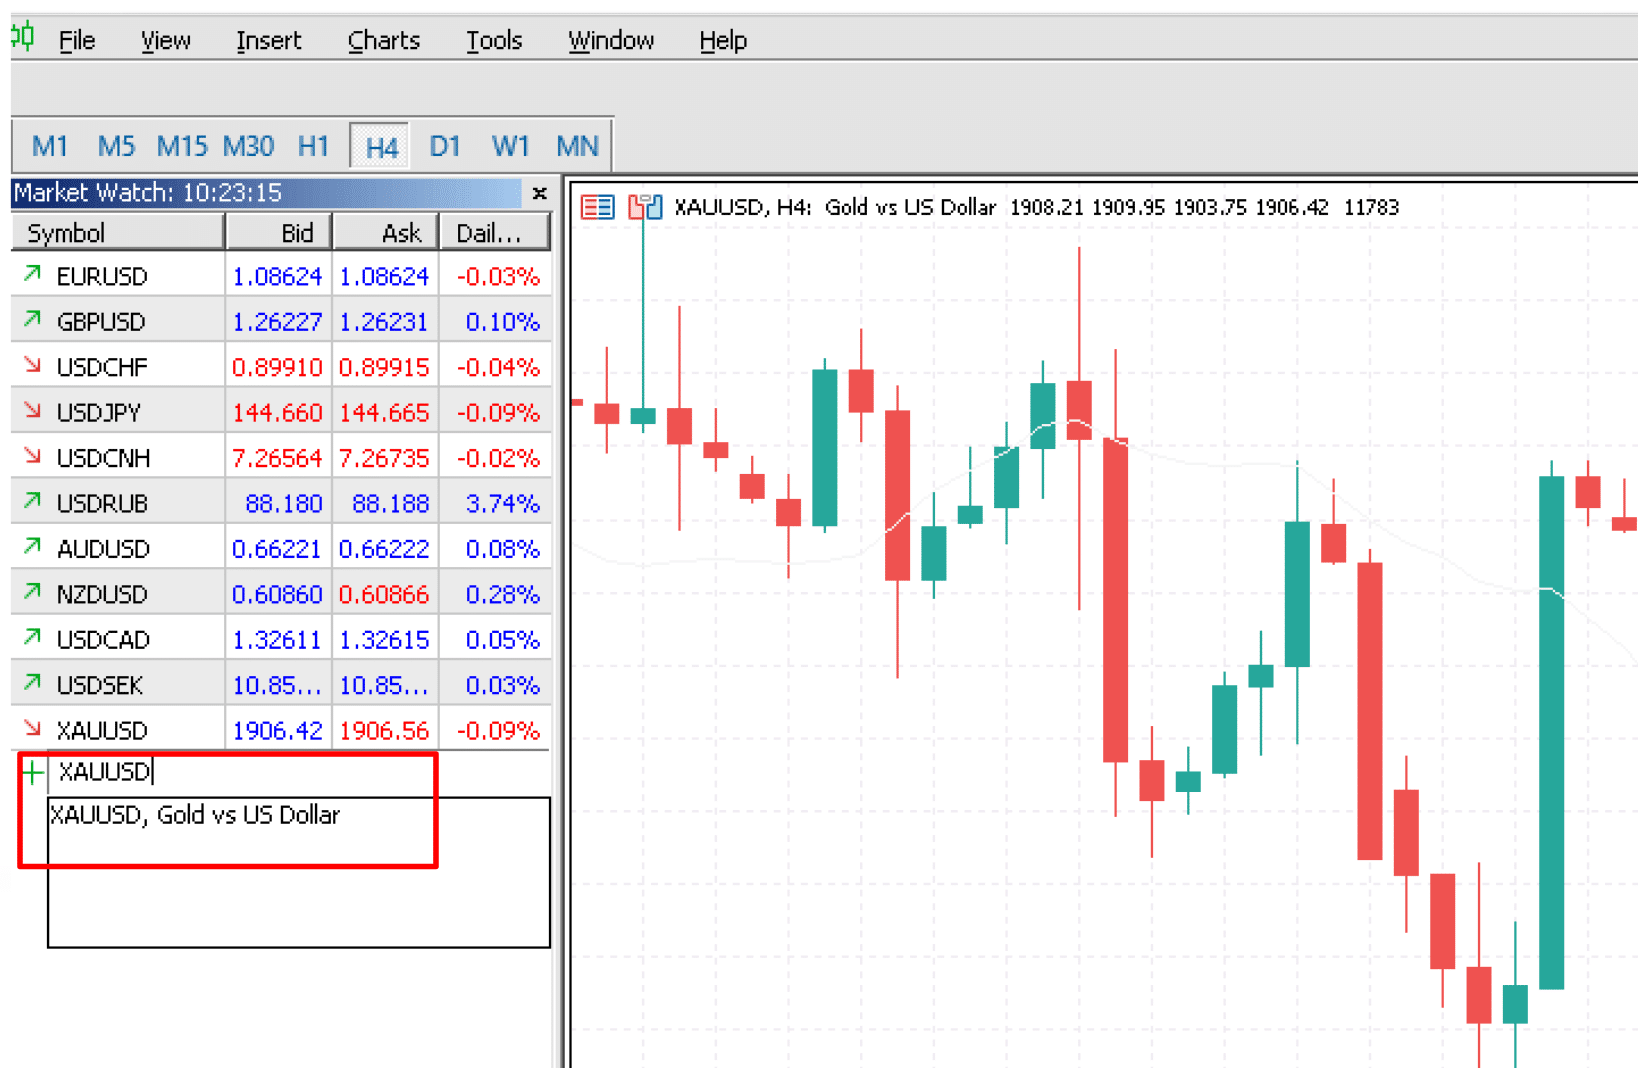 XAUUSD Pair and Real time Bid and Ask Global Gold Prices